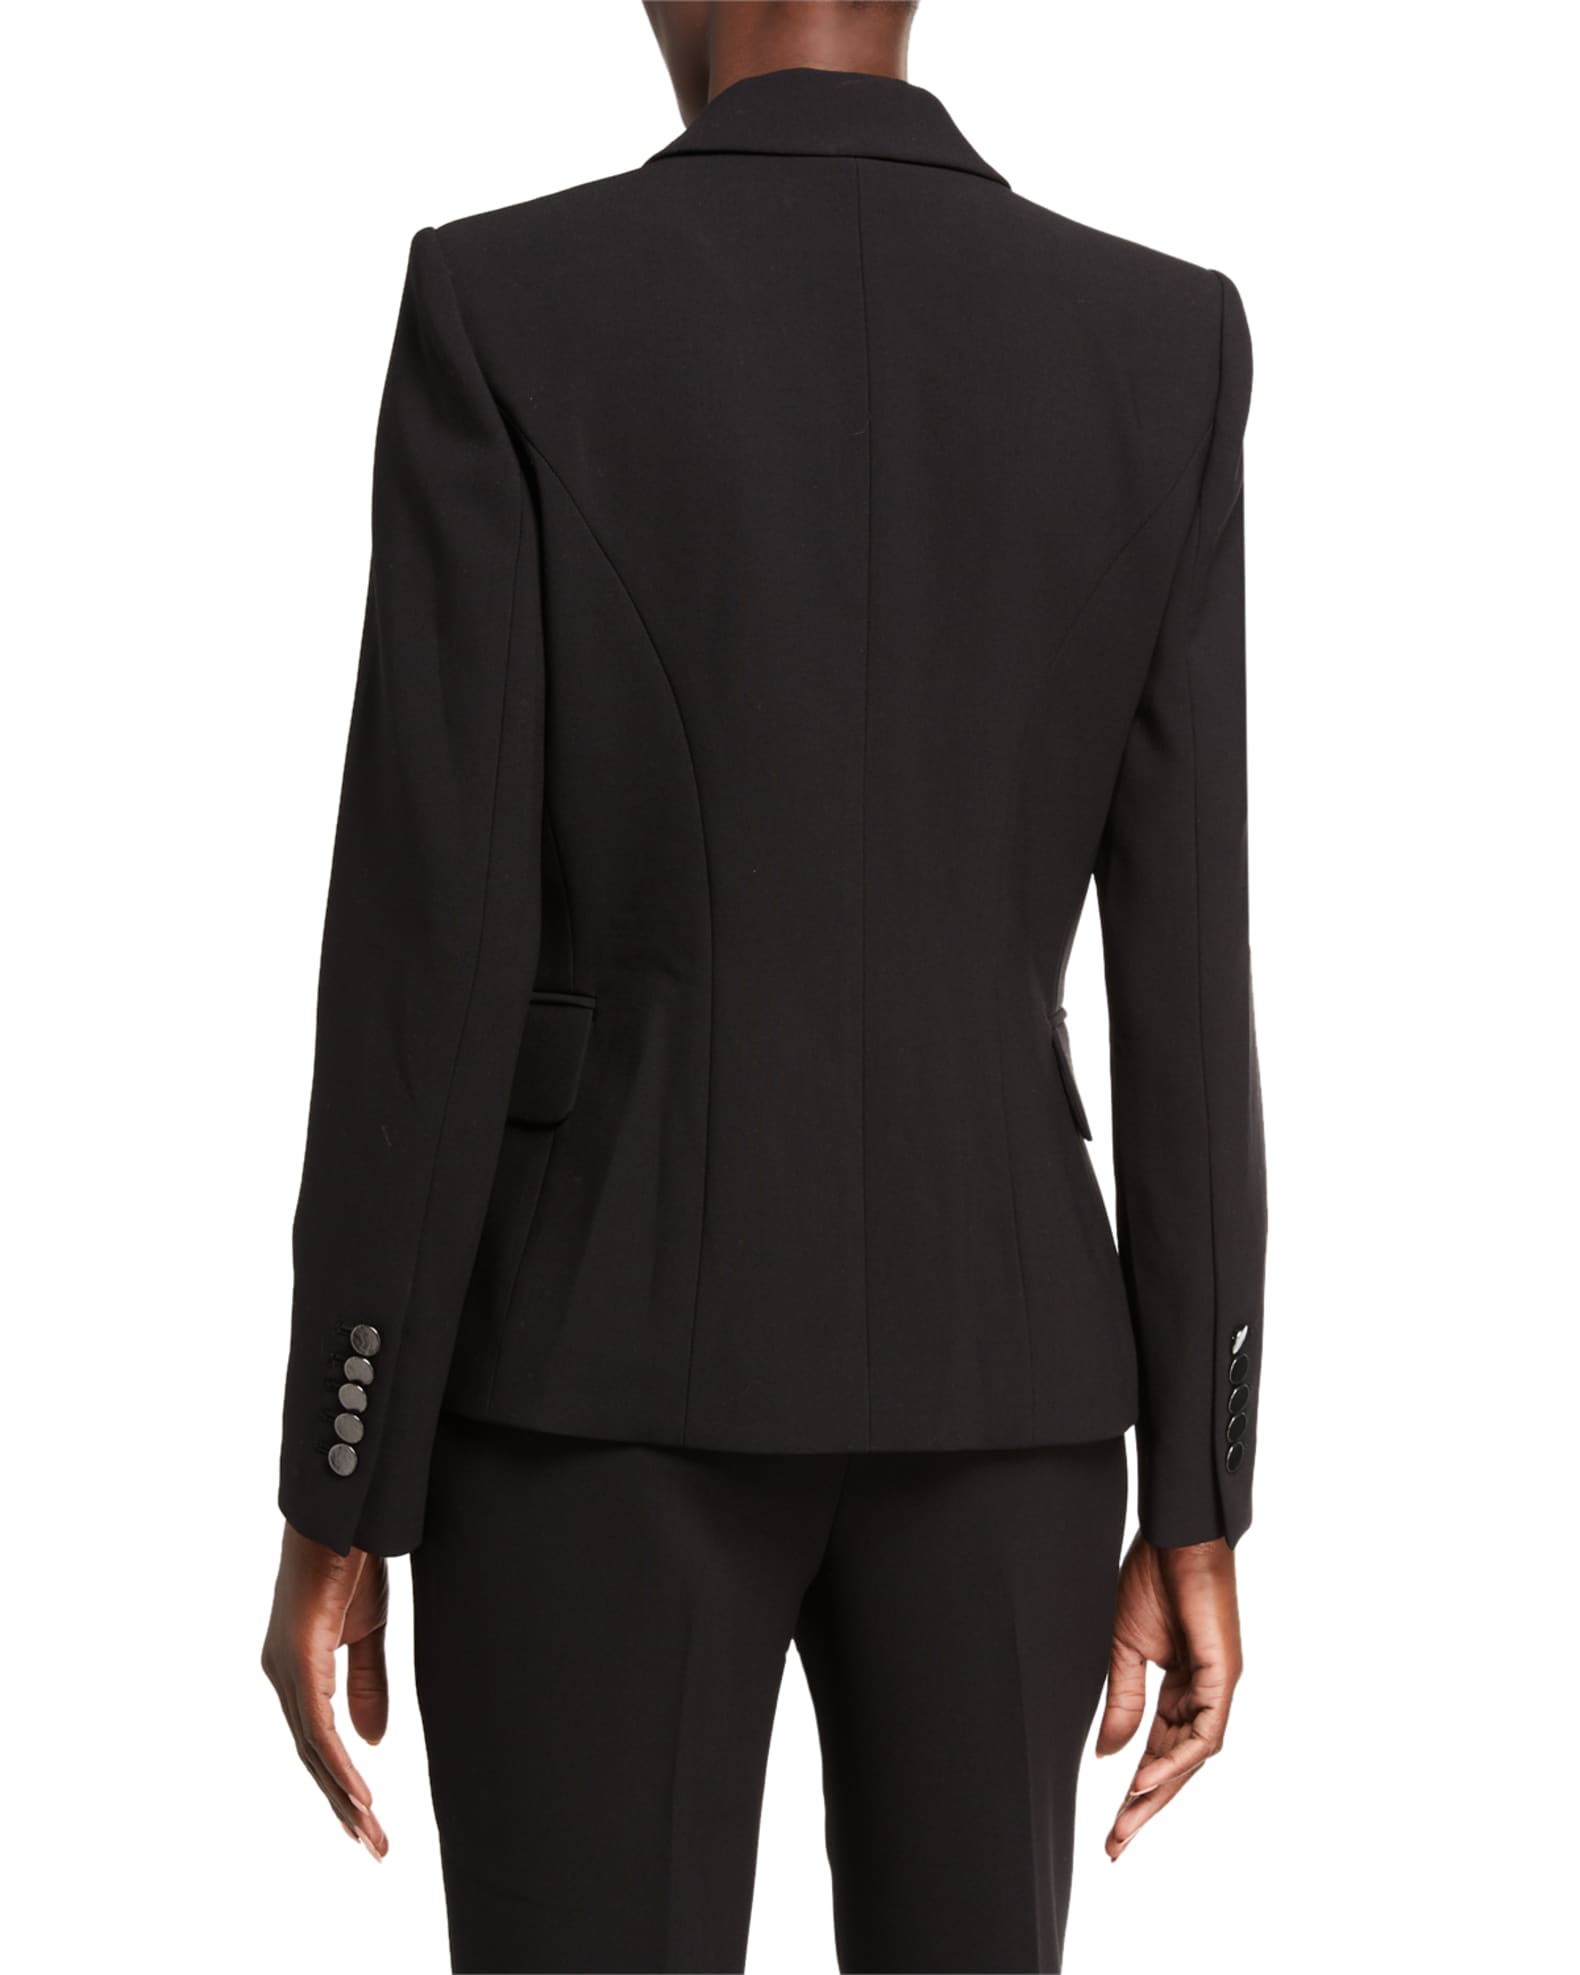 Dylan One-Button Tailored Jacket and Matching Items | Neiman Marcus